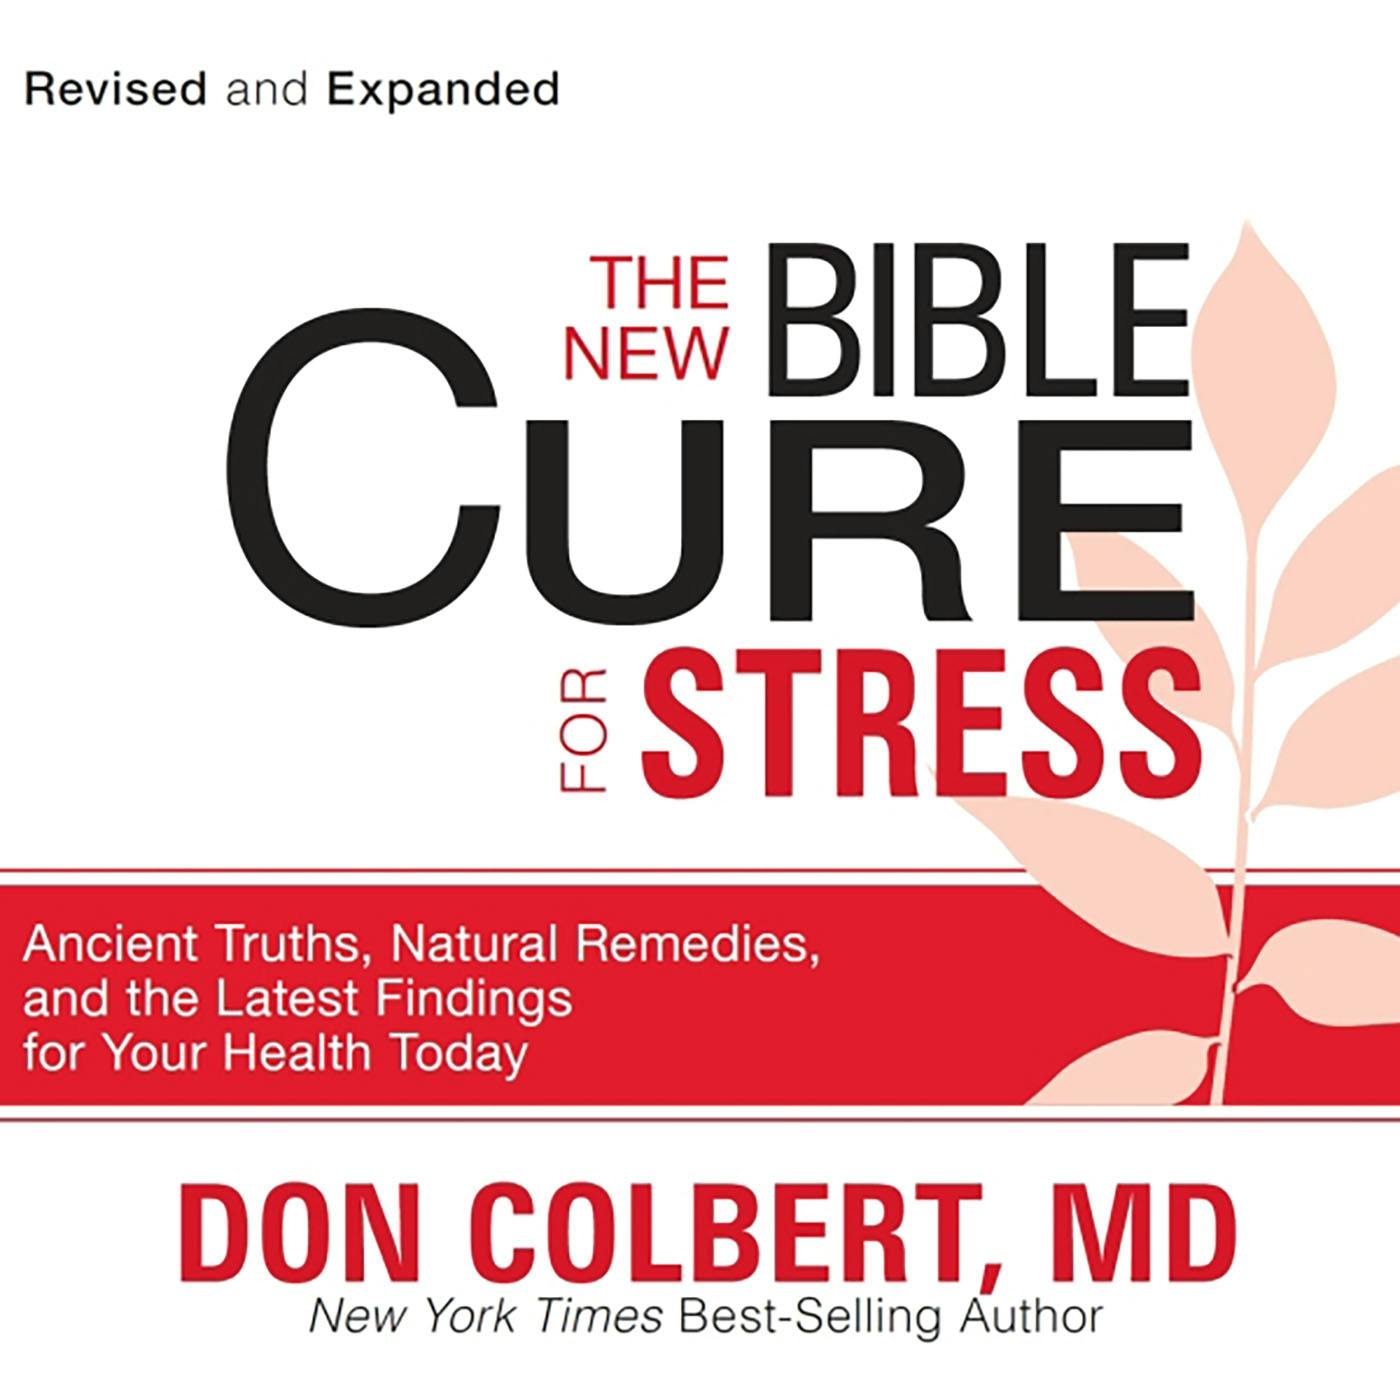 The New Bible Cure for Stress: Ancient Truths, Natural Remedies, and the Latest Findings for Your Health Today - Don Colbert